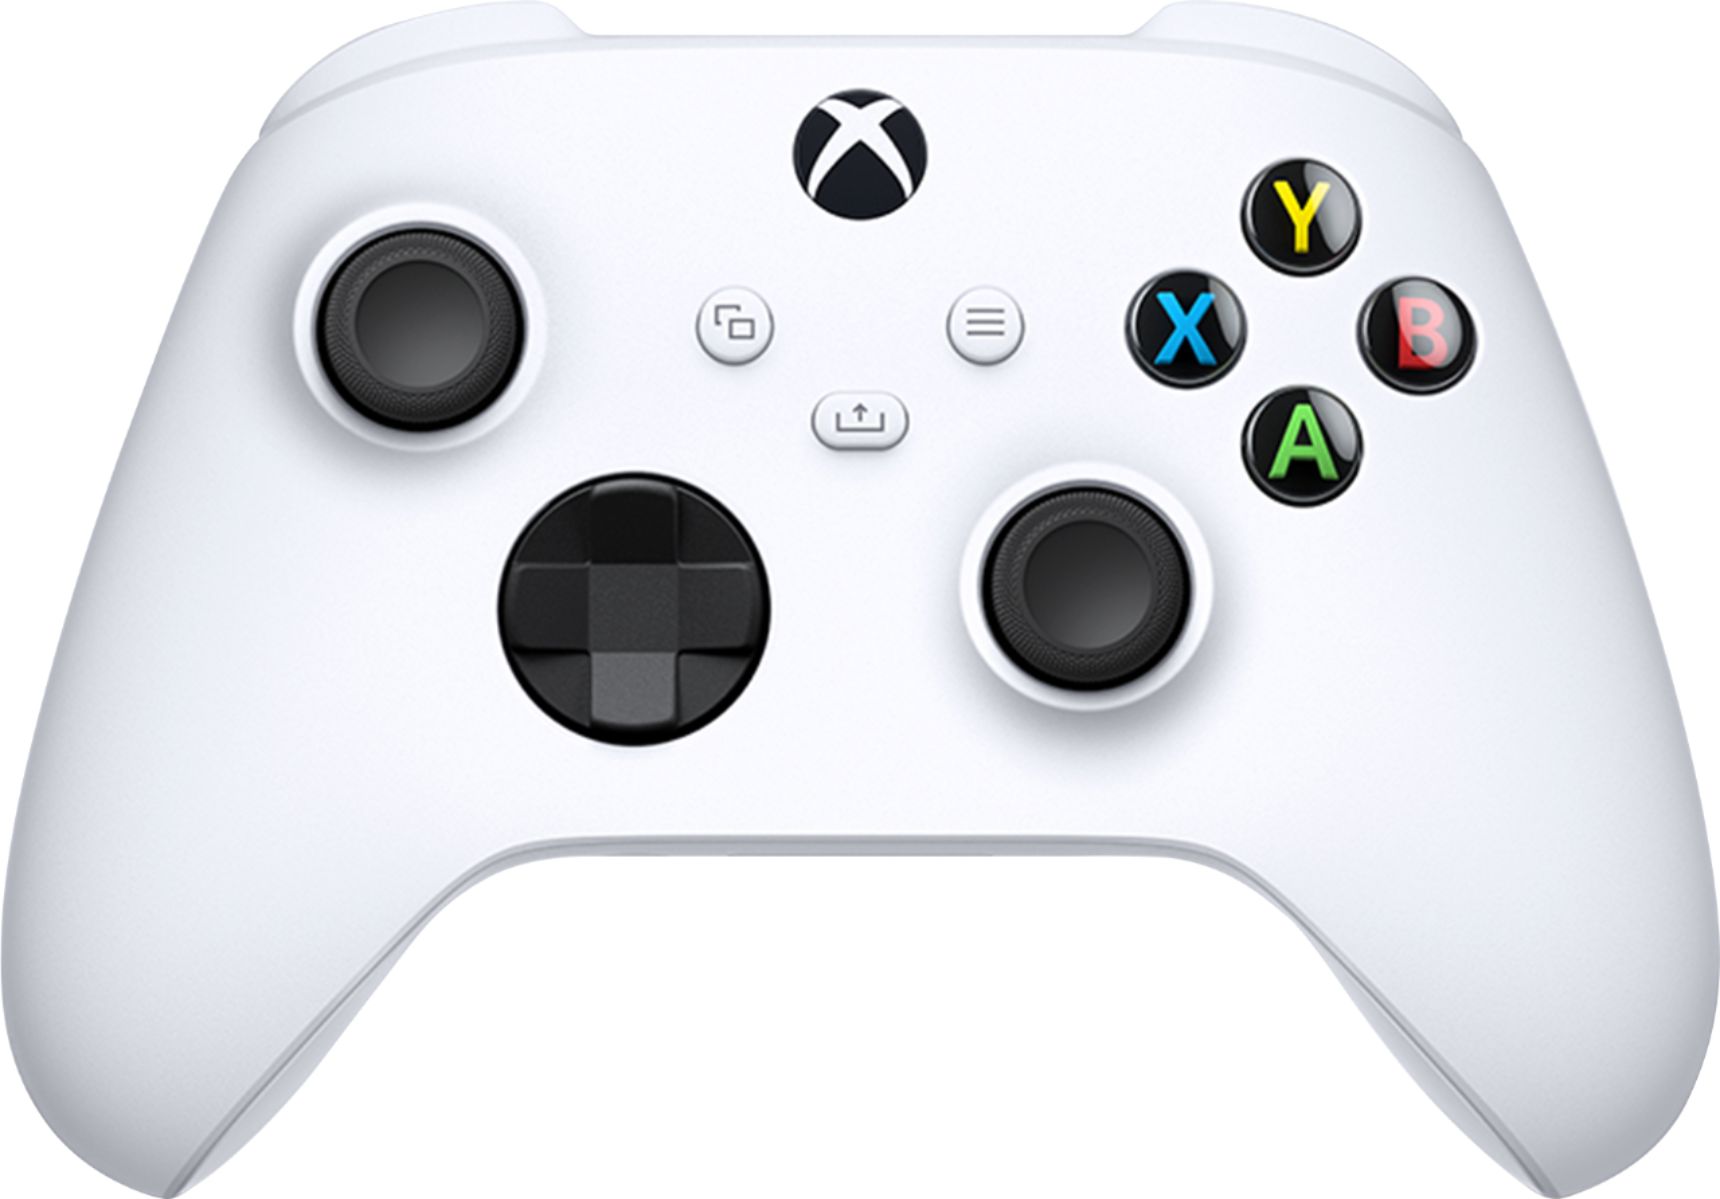 FiveStar USB Wireless Game Pad Controller for Use With Microsoft Xbox 360 White/Grey 